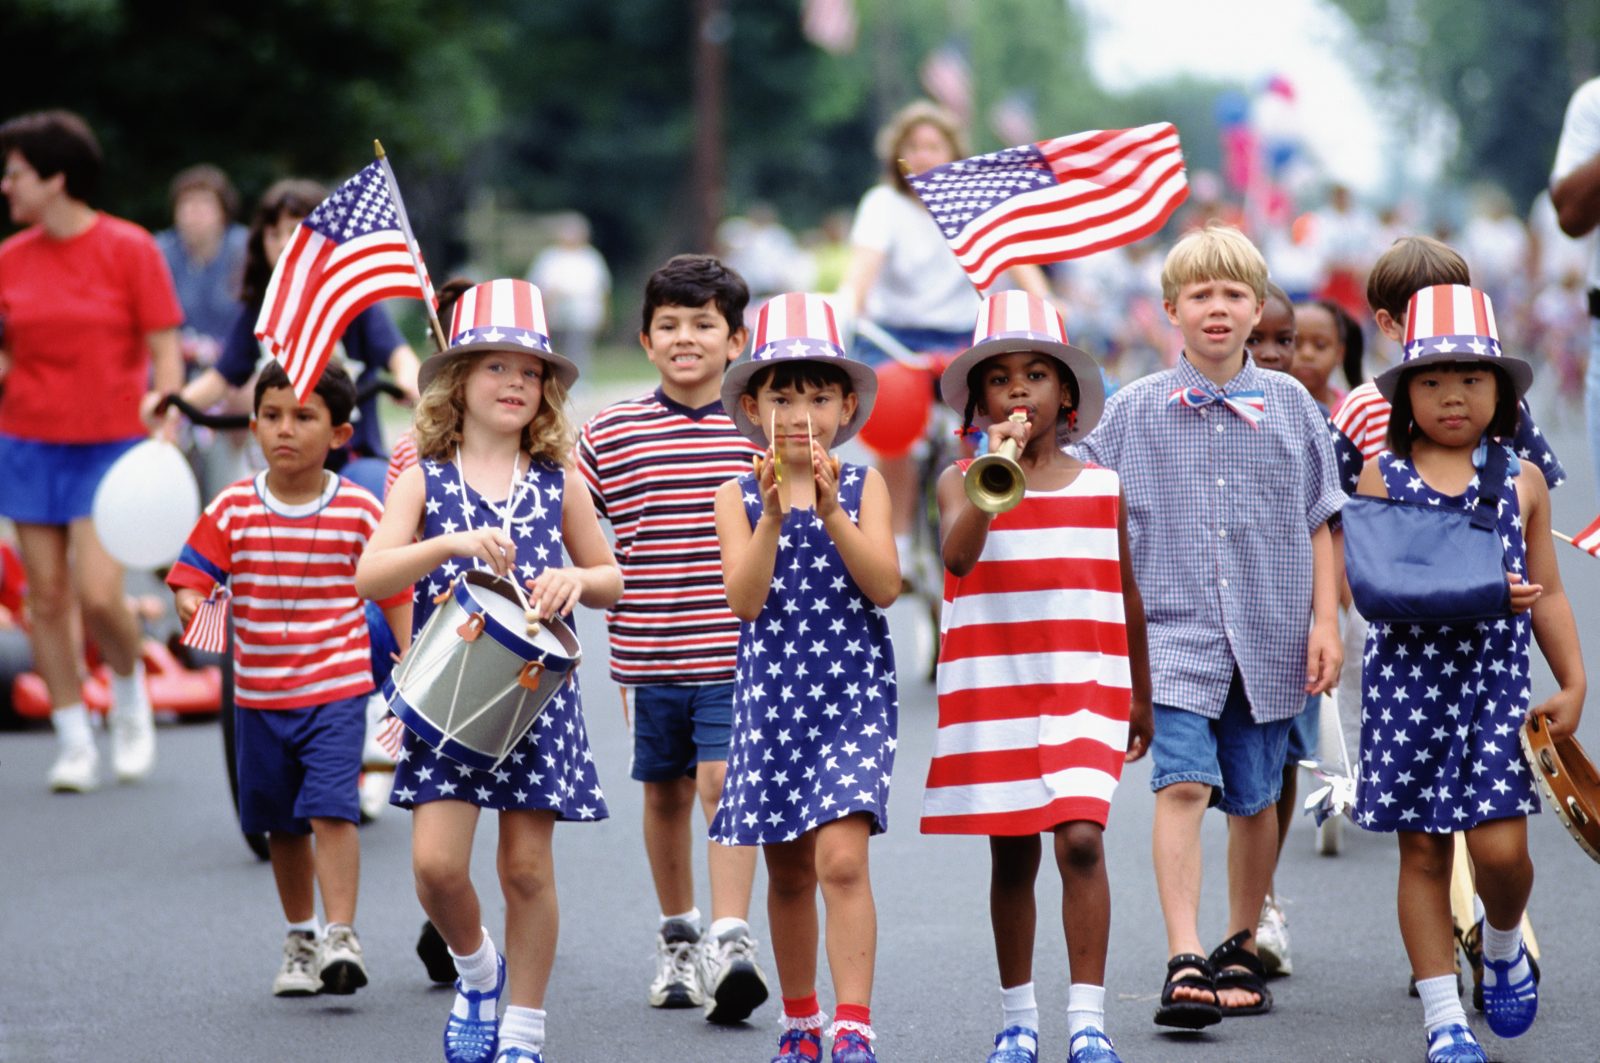 Can You Get an ‘A’ In This Middle School U.S. History Test? Independence Day parade